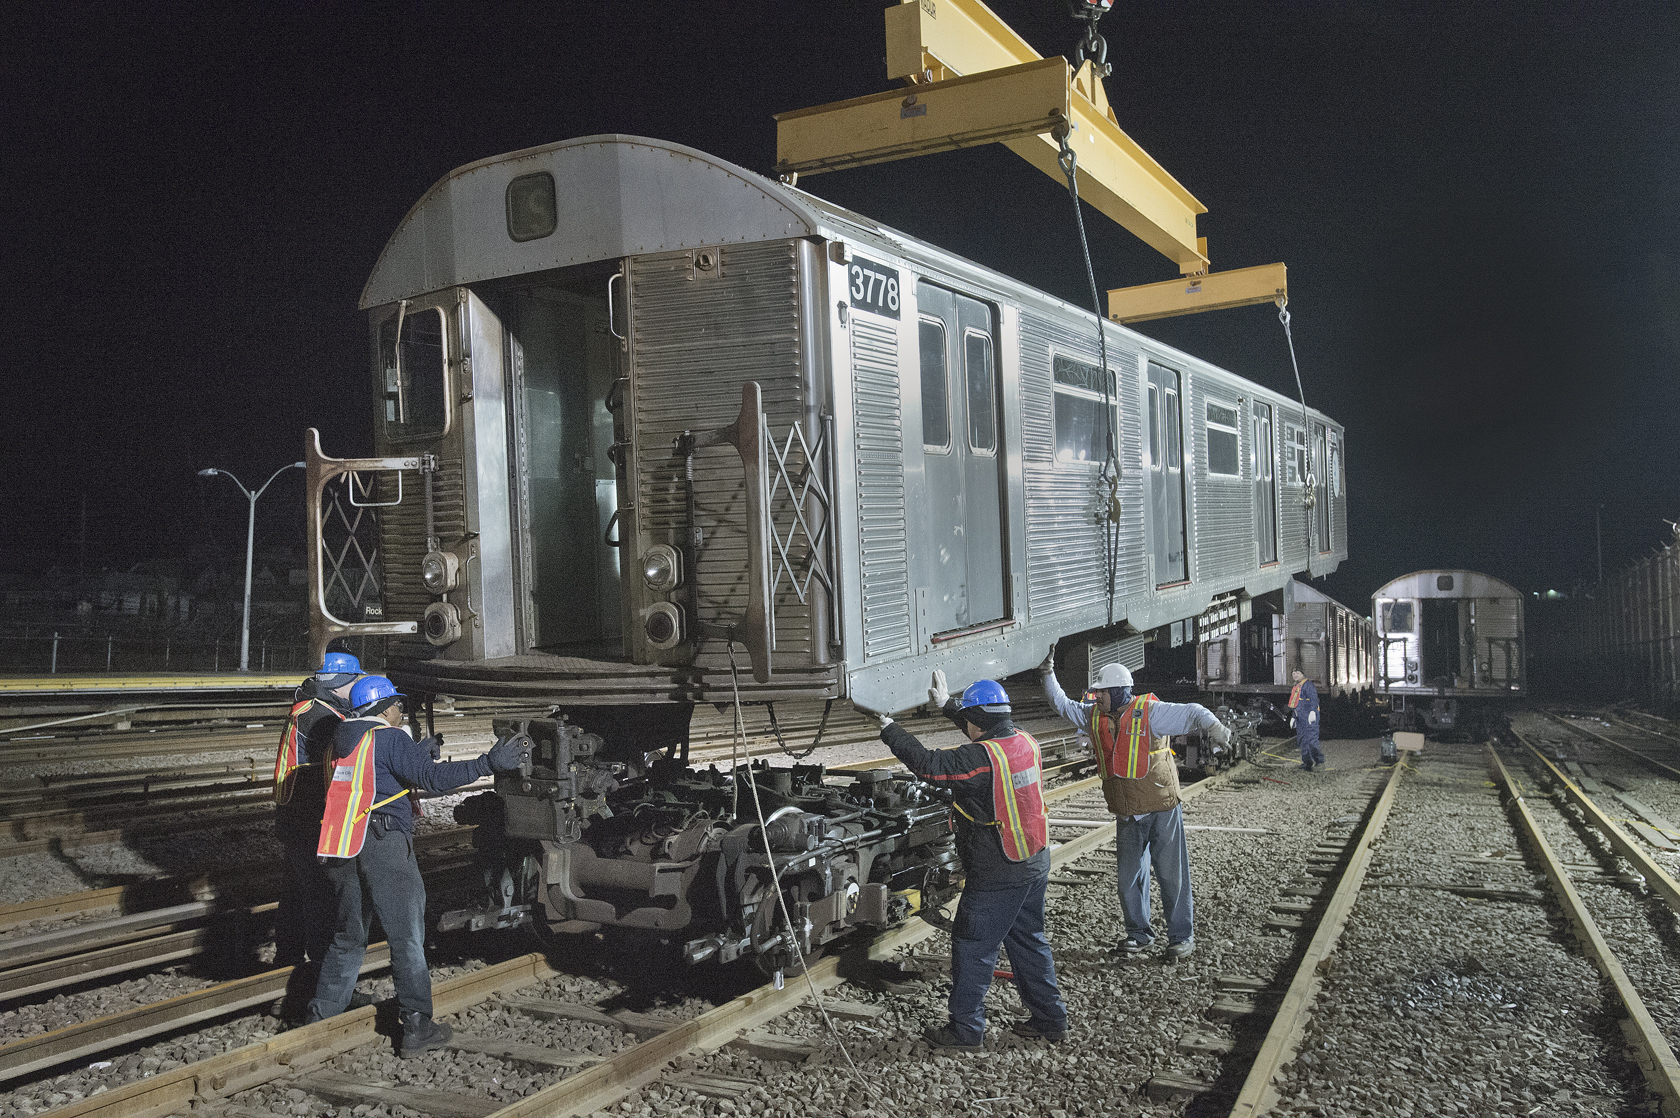 workers are working on the side of a train